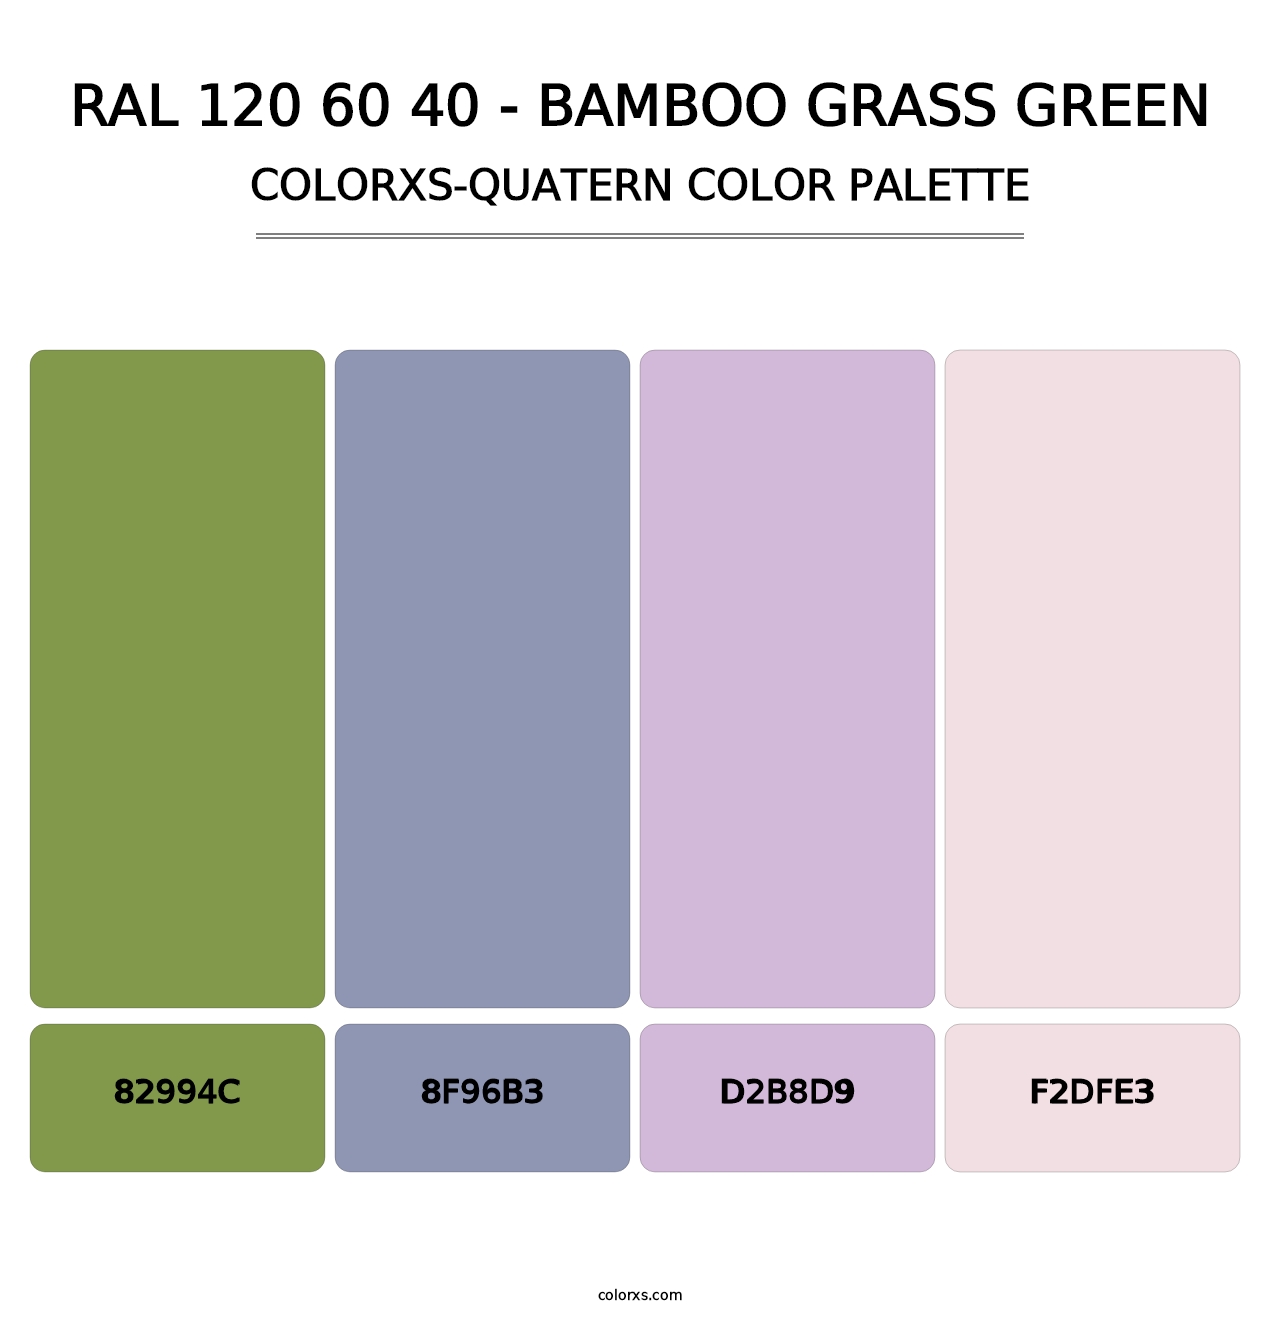 RAL 120 60 40 - Bamboo Grass Green - Colorxs Quatern Palette